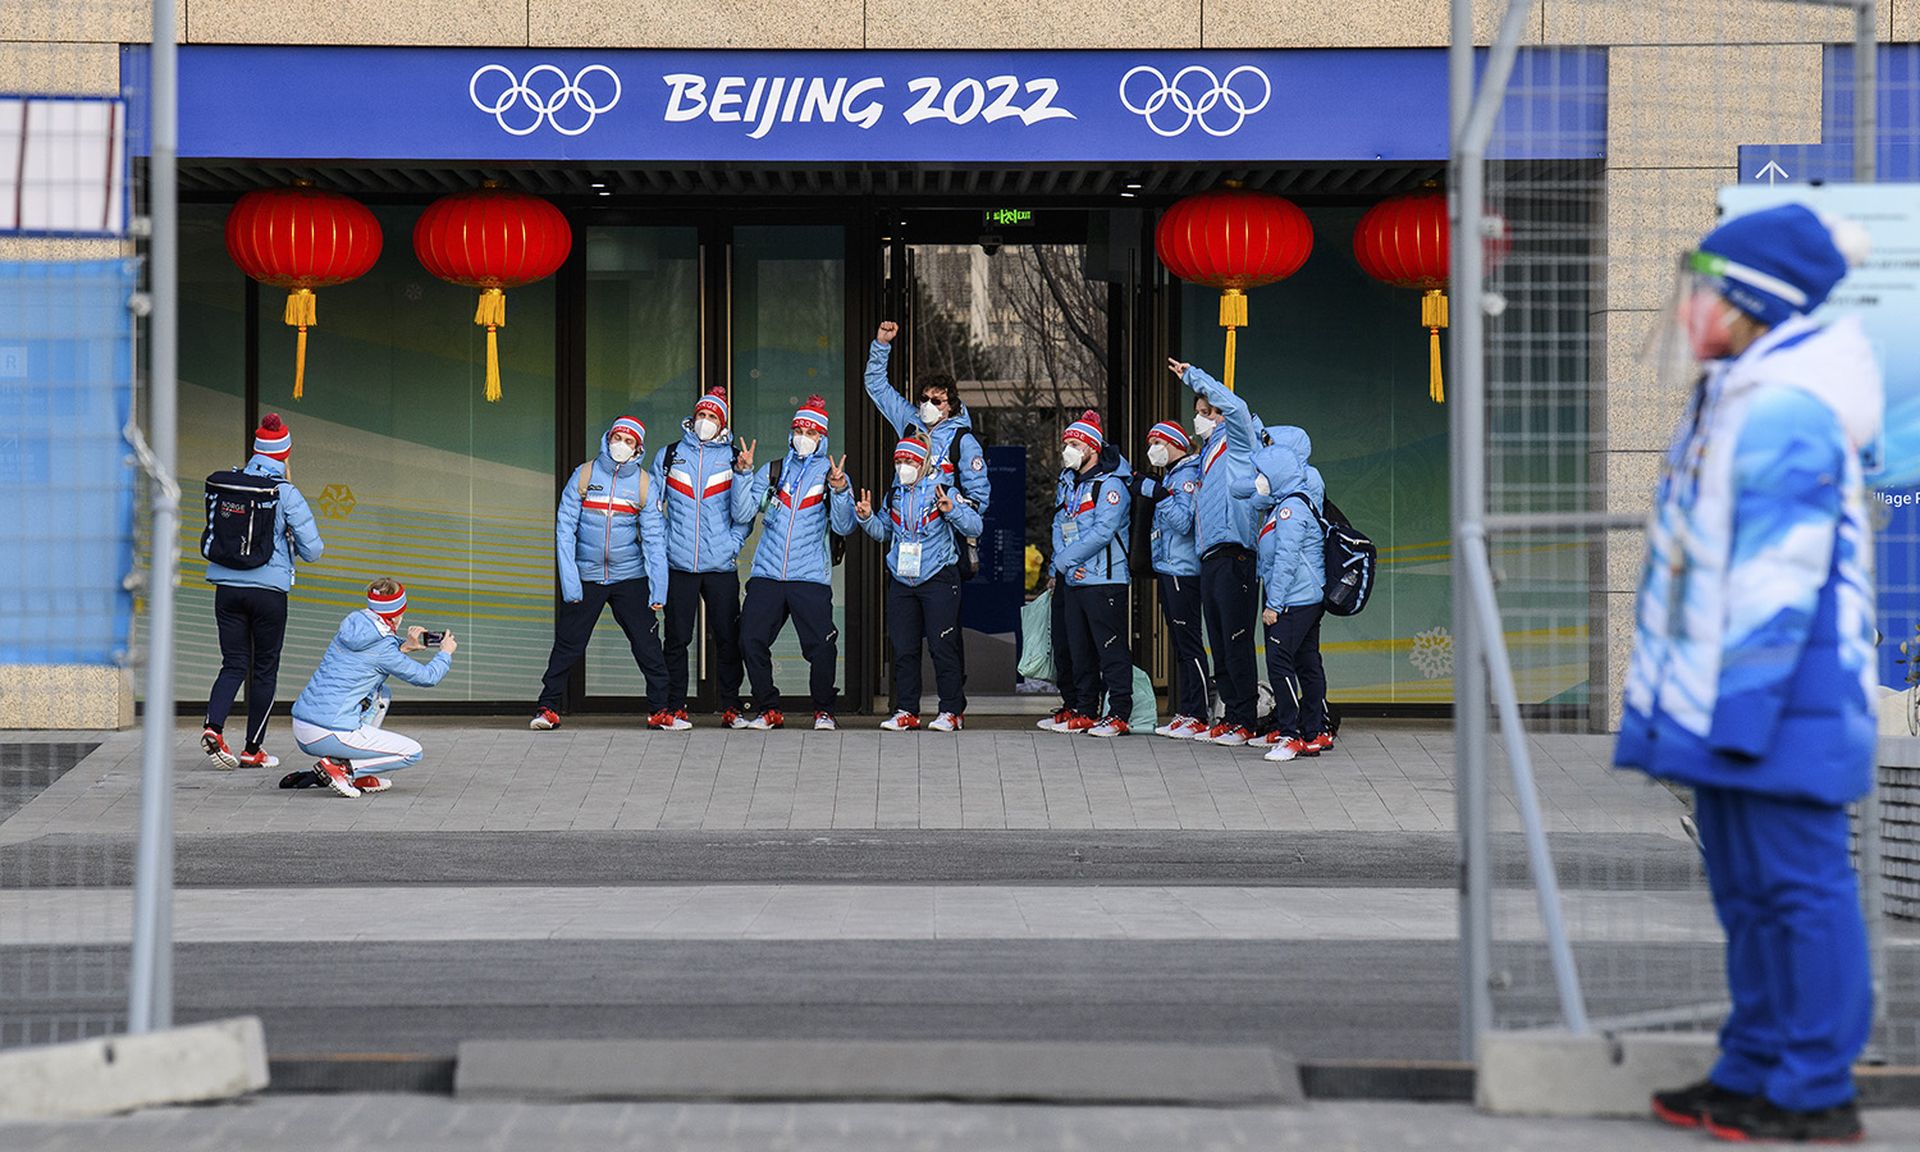 Members of Team Norway pose for a photo after passing through the gate for the Olympic Village ahead of the Beijing 2022 Winter Olympic Games on Feb. 1, 2022 in Beijing, China. (Photo by Anthony Wallace/Pool via Getty Images)